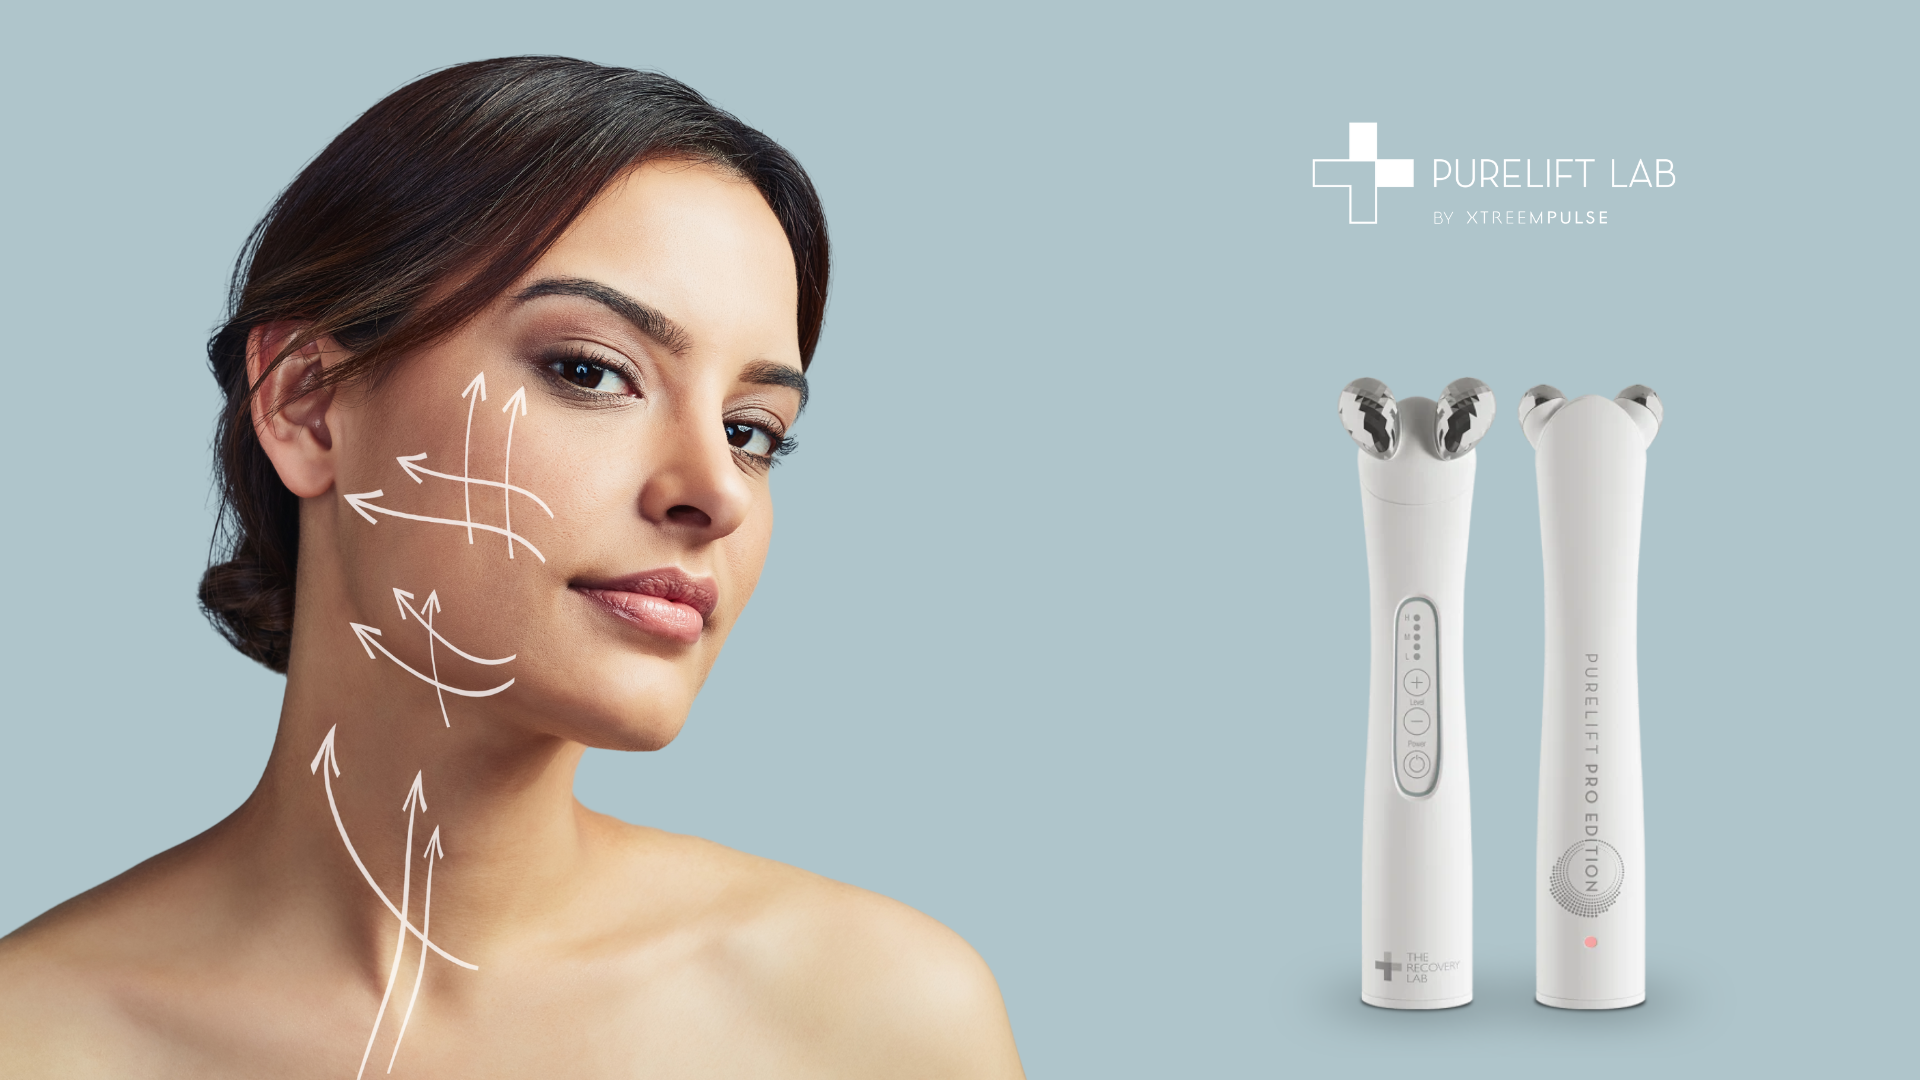 Rejuvenate Your Skin with PureLiftLab: The Ultimate Facial Devices